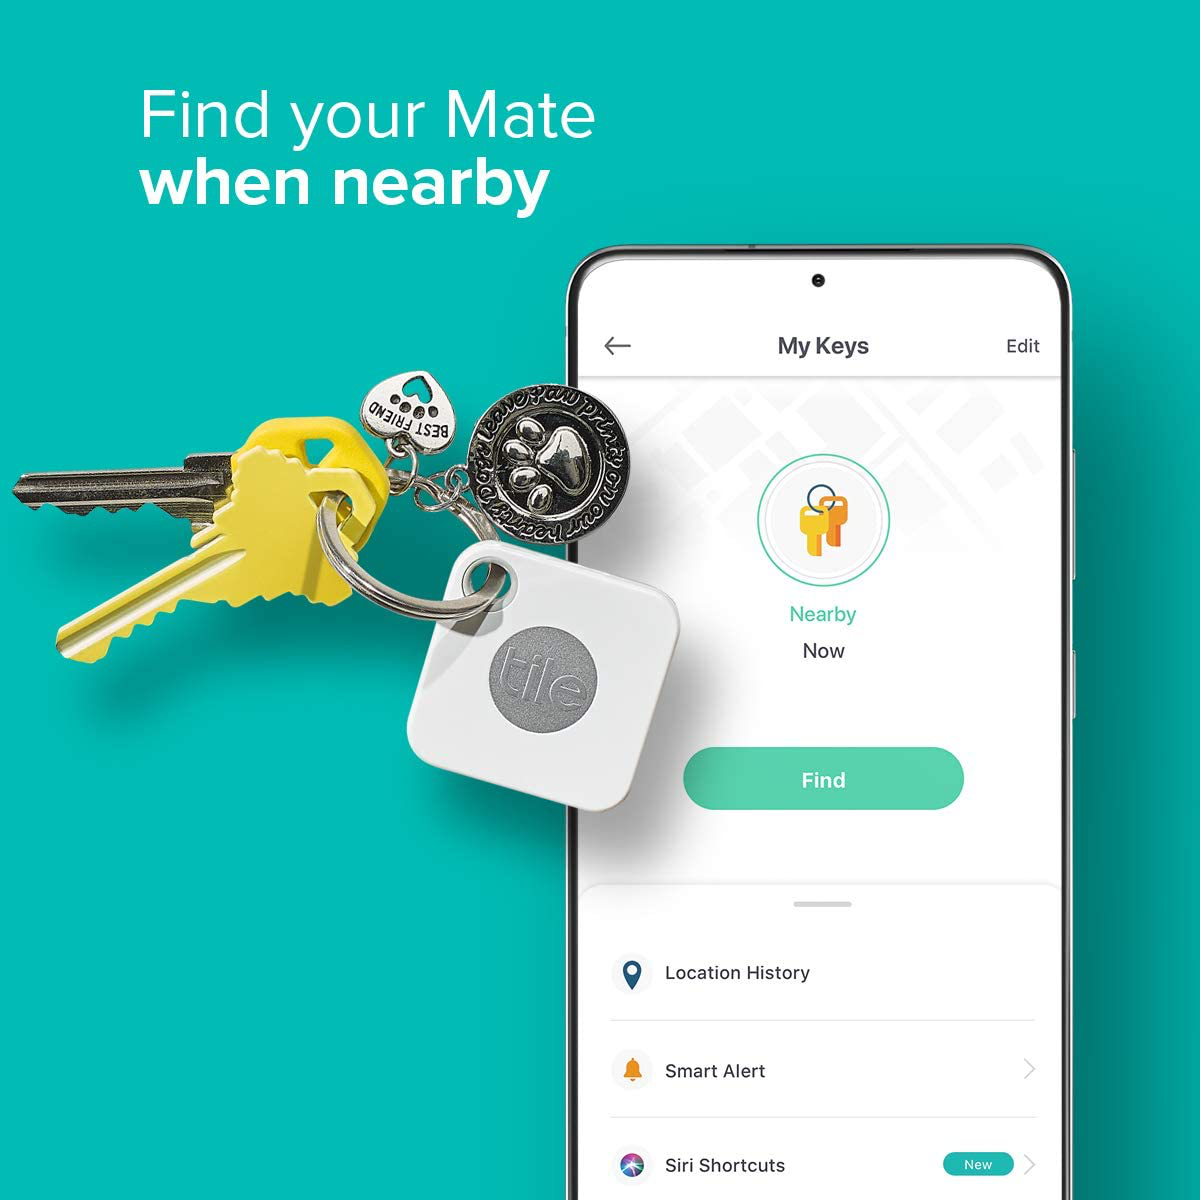 Tile Mate Bluetooth Tracker, Keys Finder and Item Locator for Keys, Bags and More; Water Resistant with 1 Year Replaceable Battery